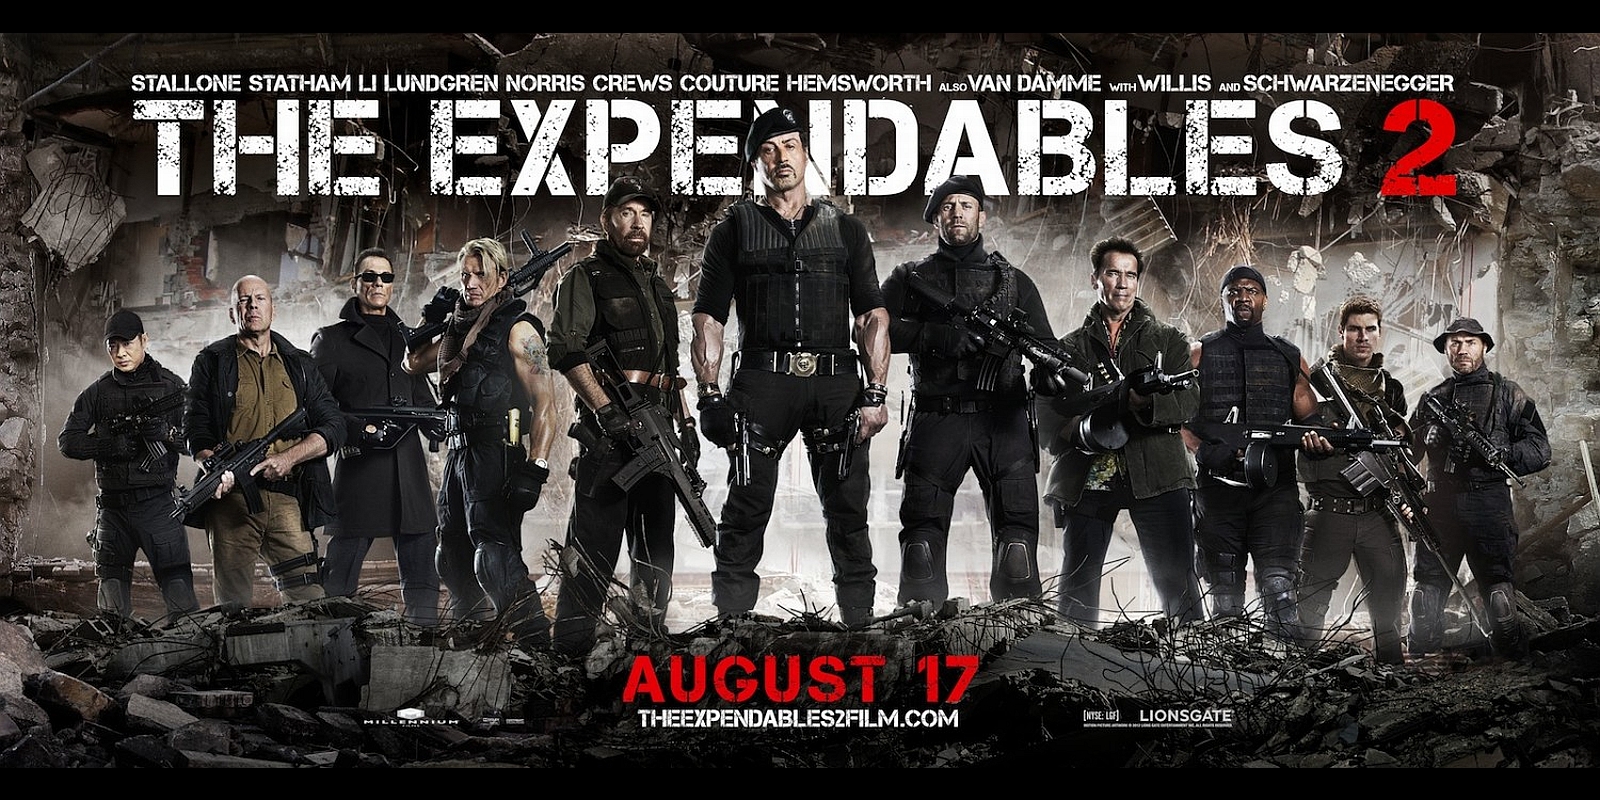 Arnold Schwarzenegger Barney Ross Billy The Expendables Booker The Expendables Bruce Willis Chuck No 1600x800